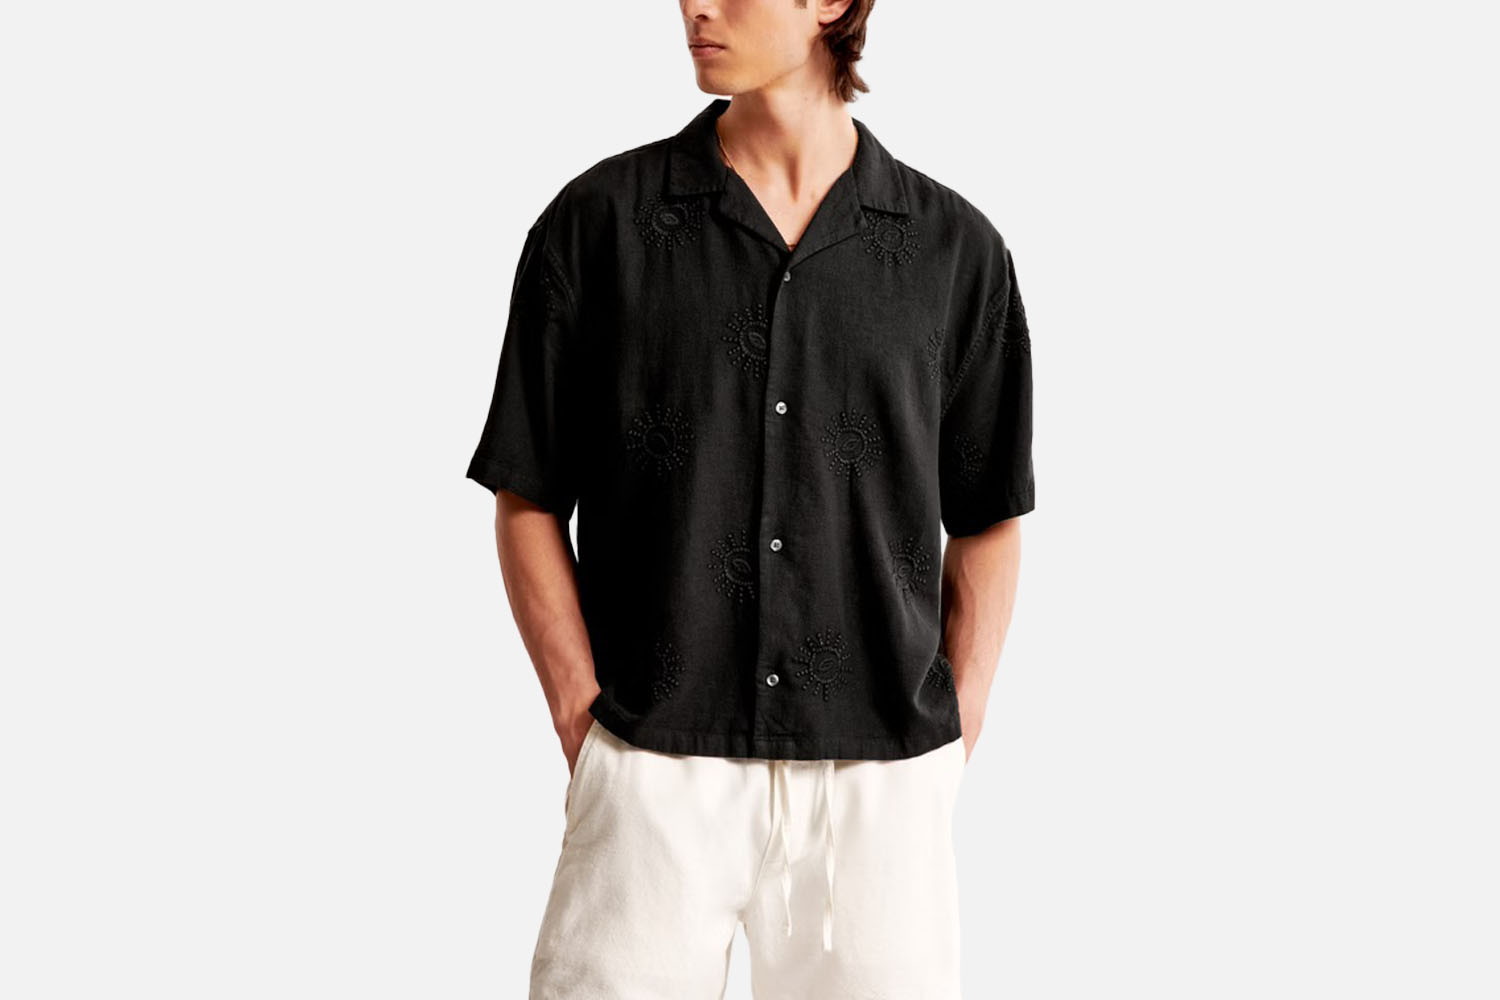 The "Flaunt It if You Got It" Crop: Abercrombie & Fitch Camp Collar Cropped Summer Linen-Blend Embroidered Shirt